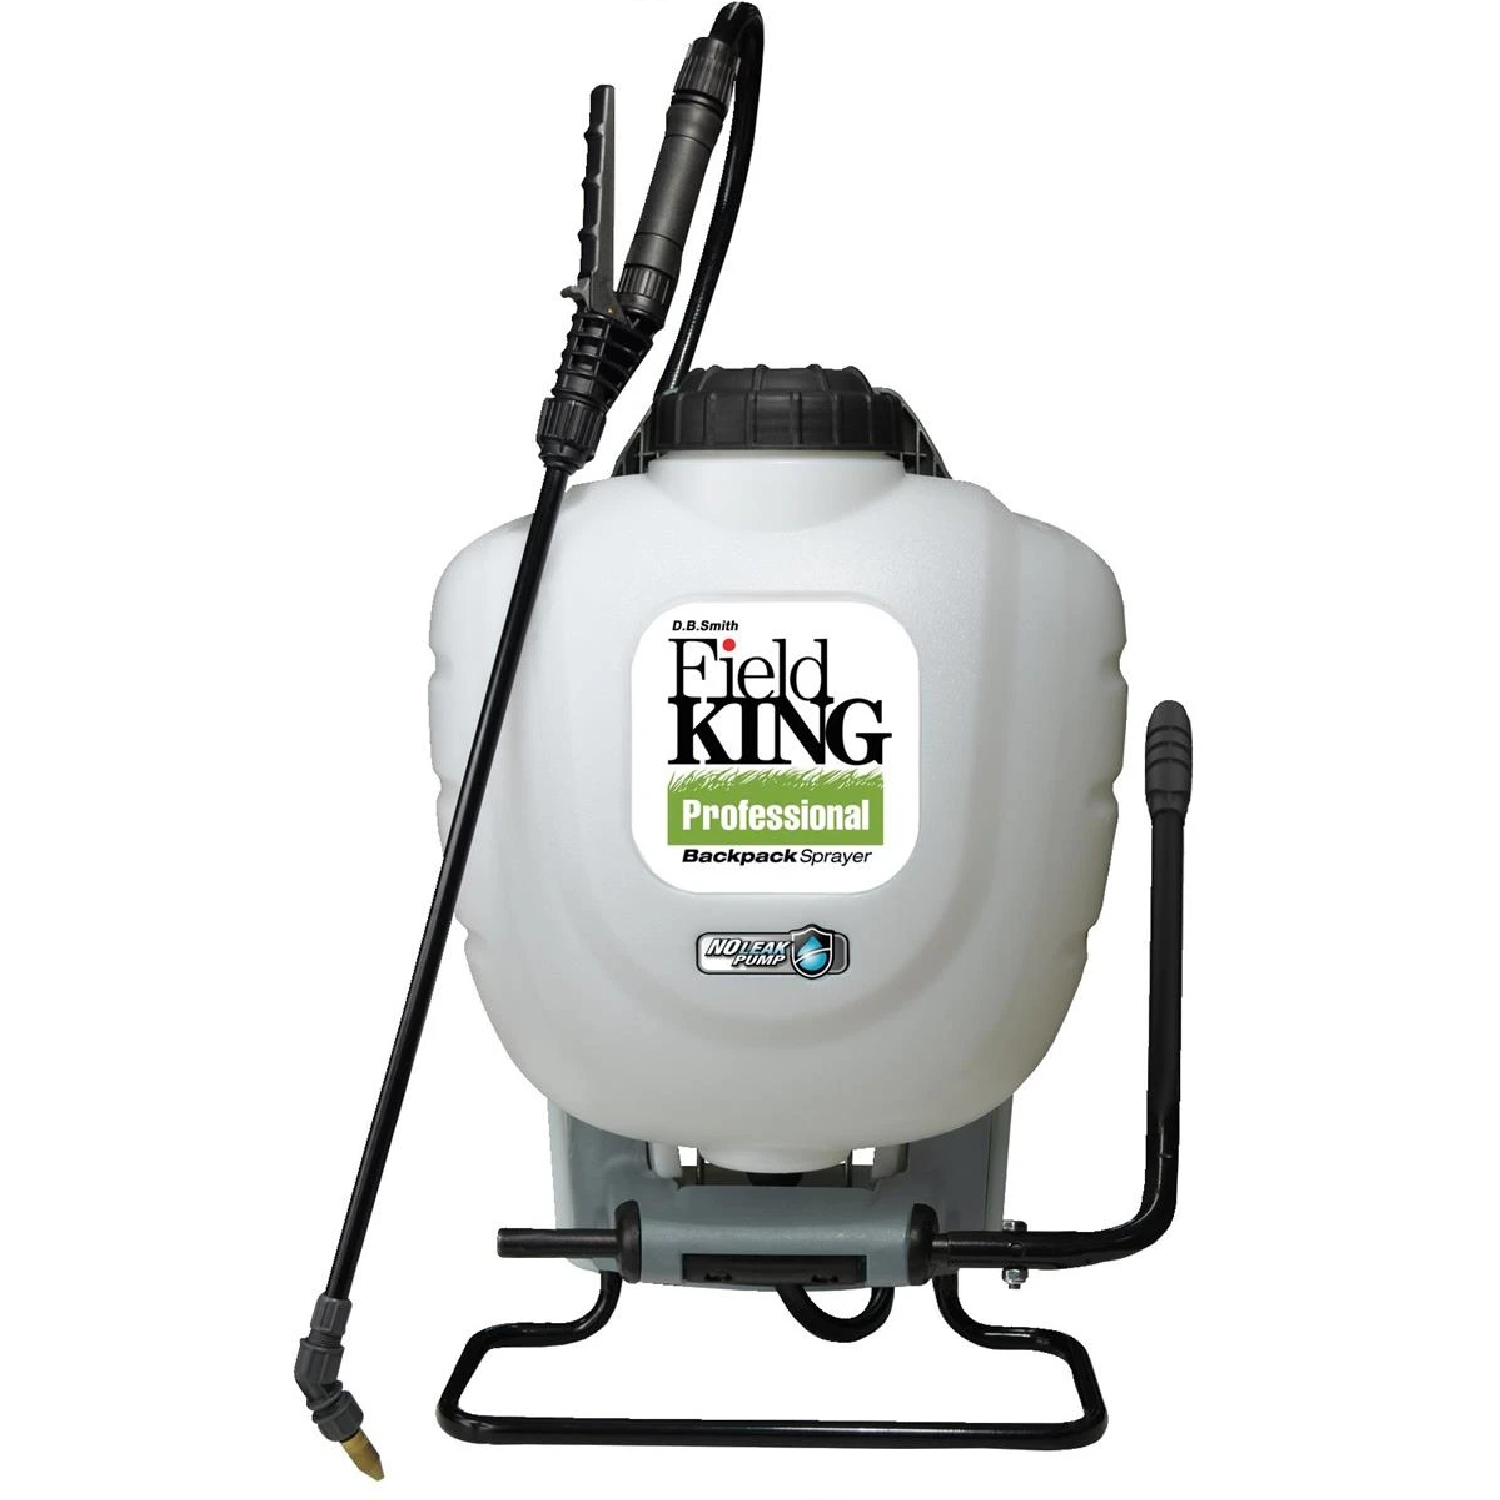 SMITH 4 Gallon Field King Professional Backpack Sprayer 190328